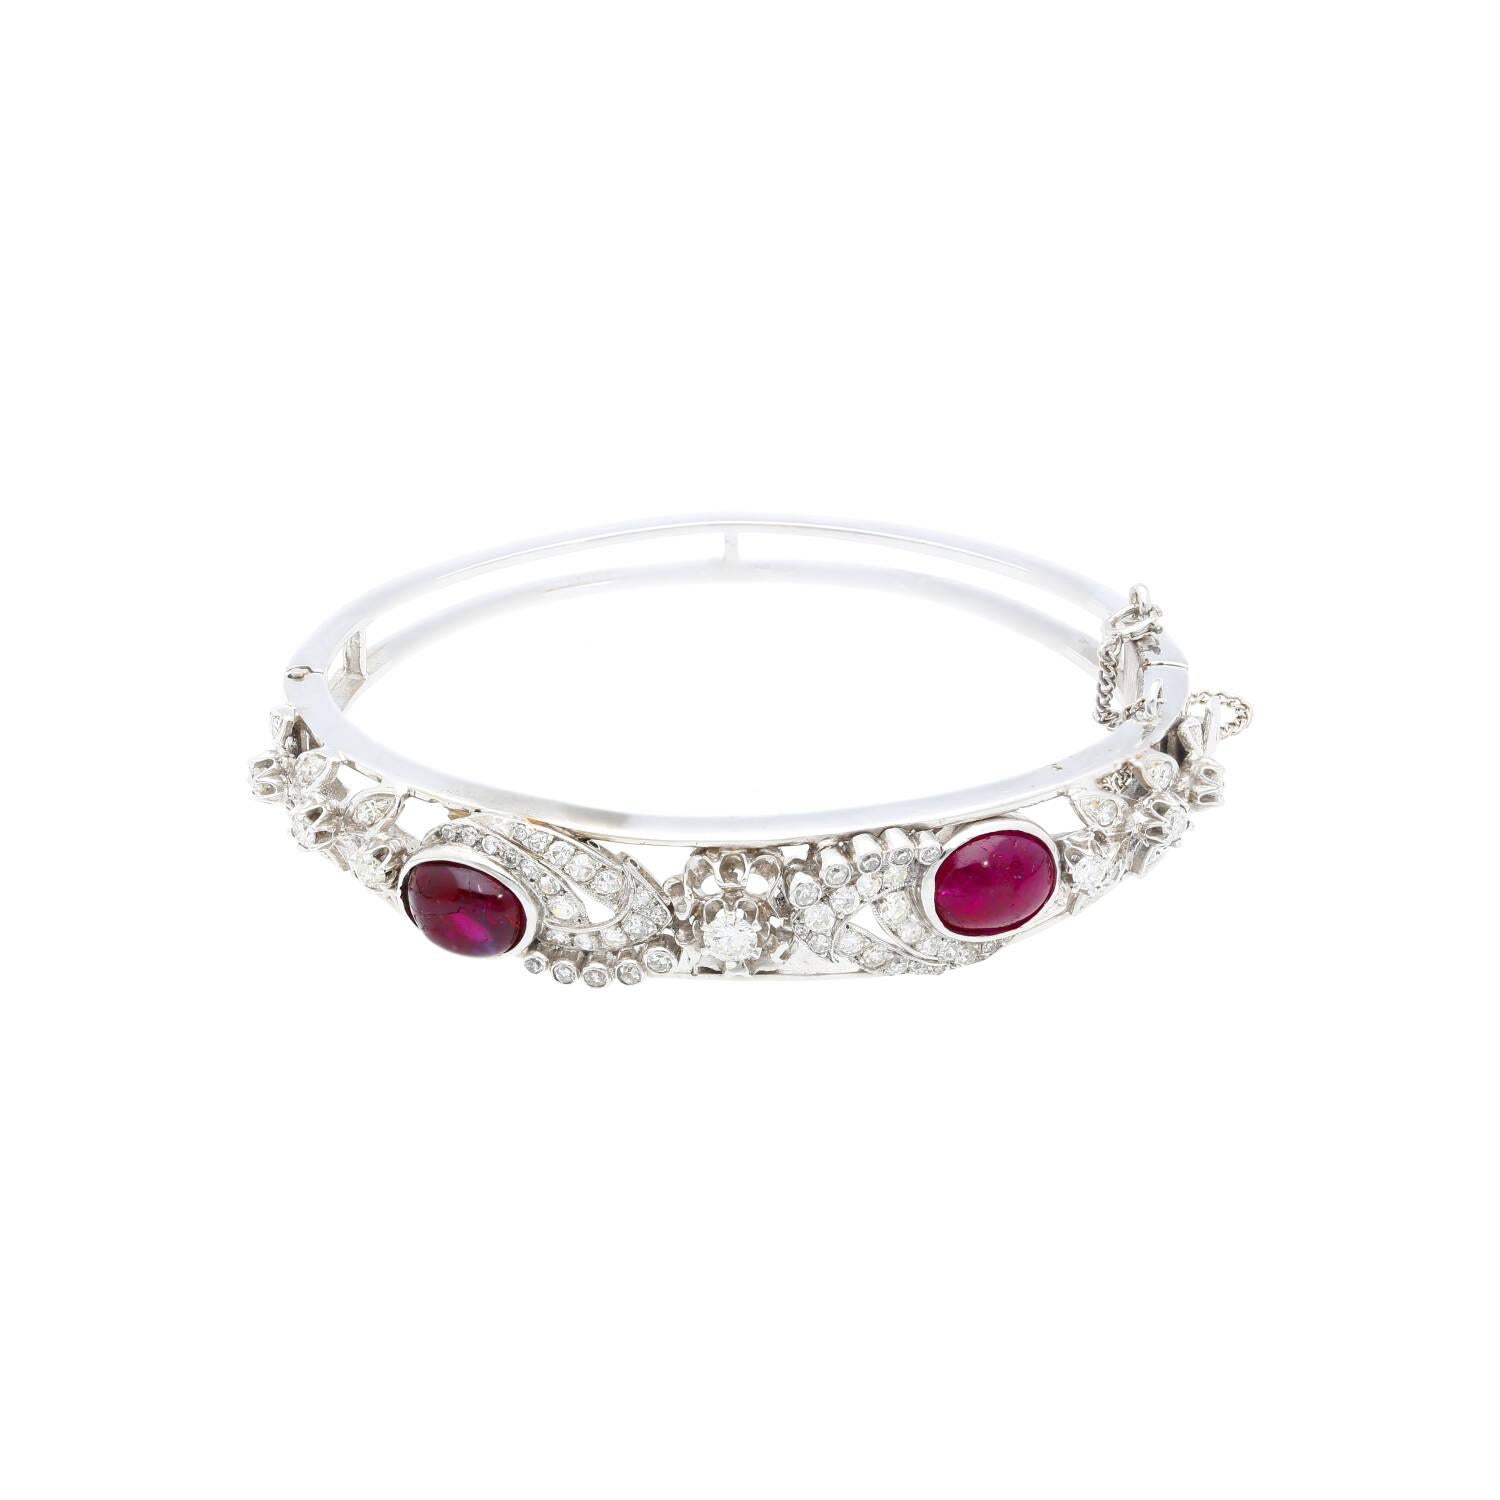 14 karat white gold mounts 2 vibrant cabochon cut red tourmaline gemstones, adorned by 81 round cut diamonds of over 2.50 carats. This bracelet features the quintessential Art Deco design, displaying stunning symmetrical patterns that complement the